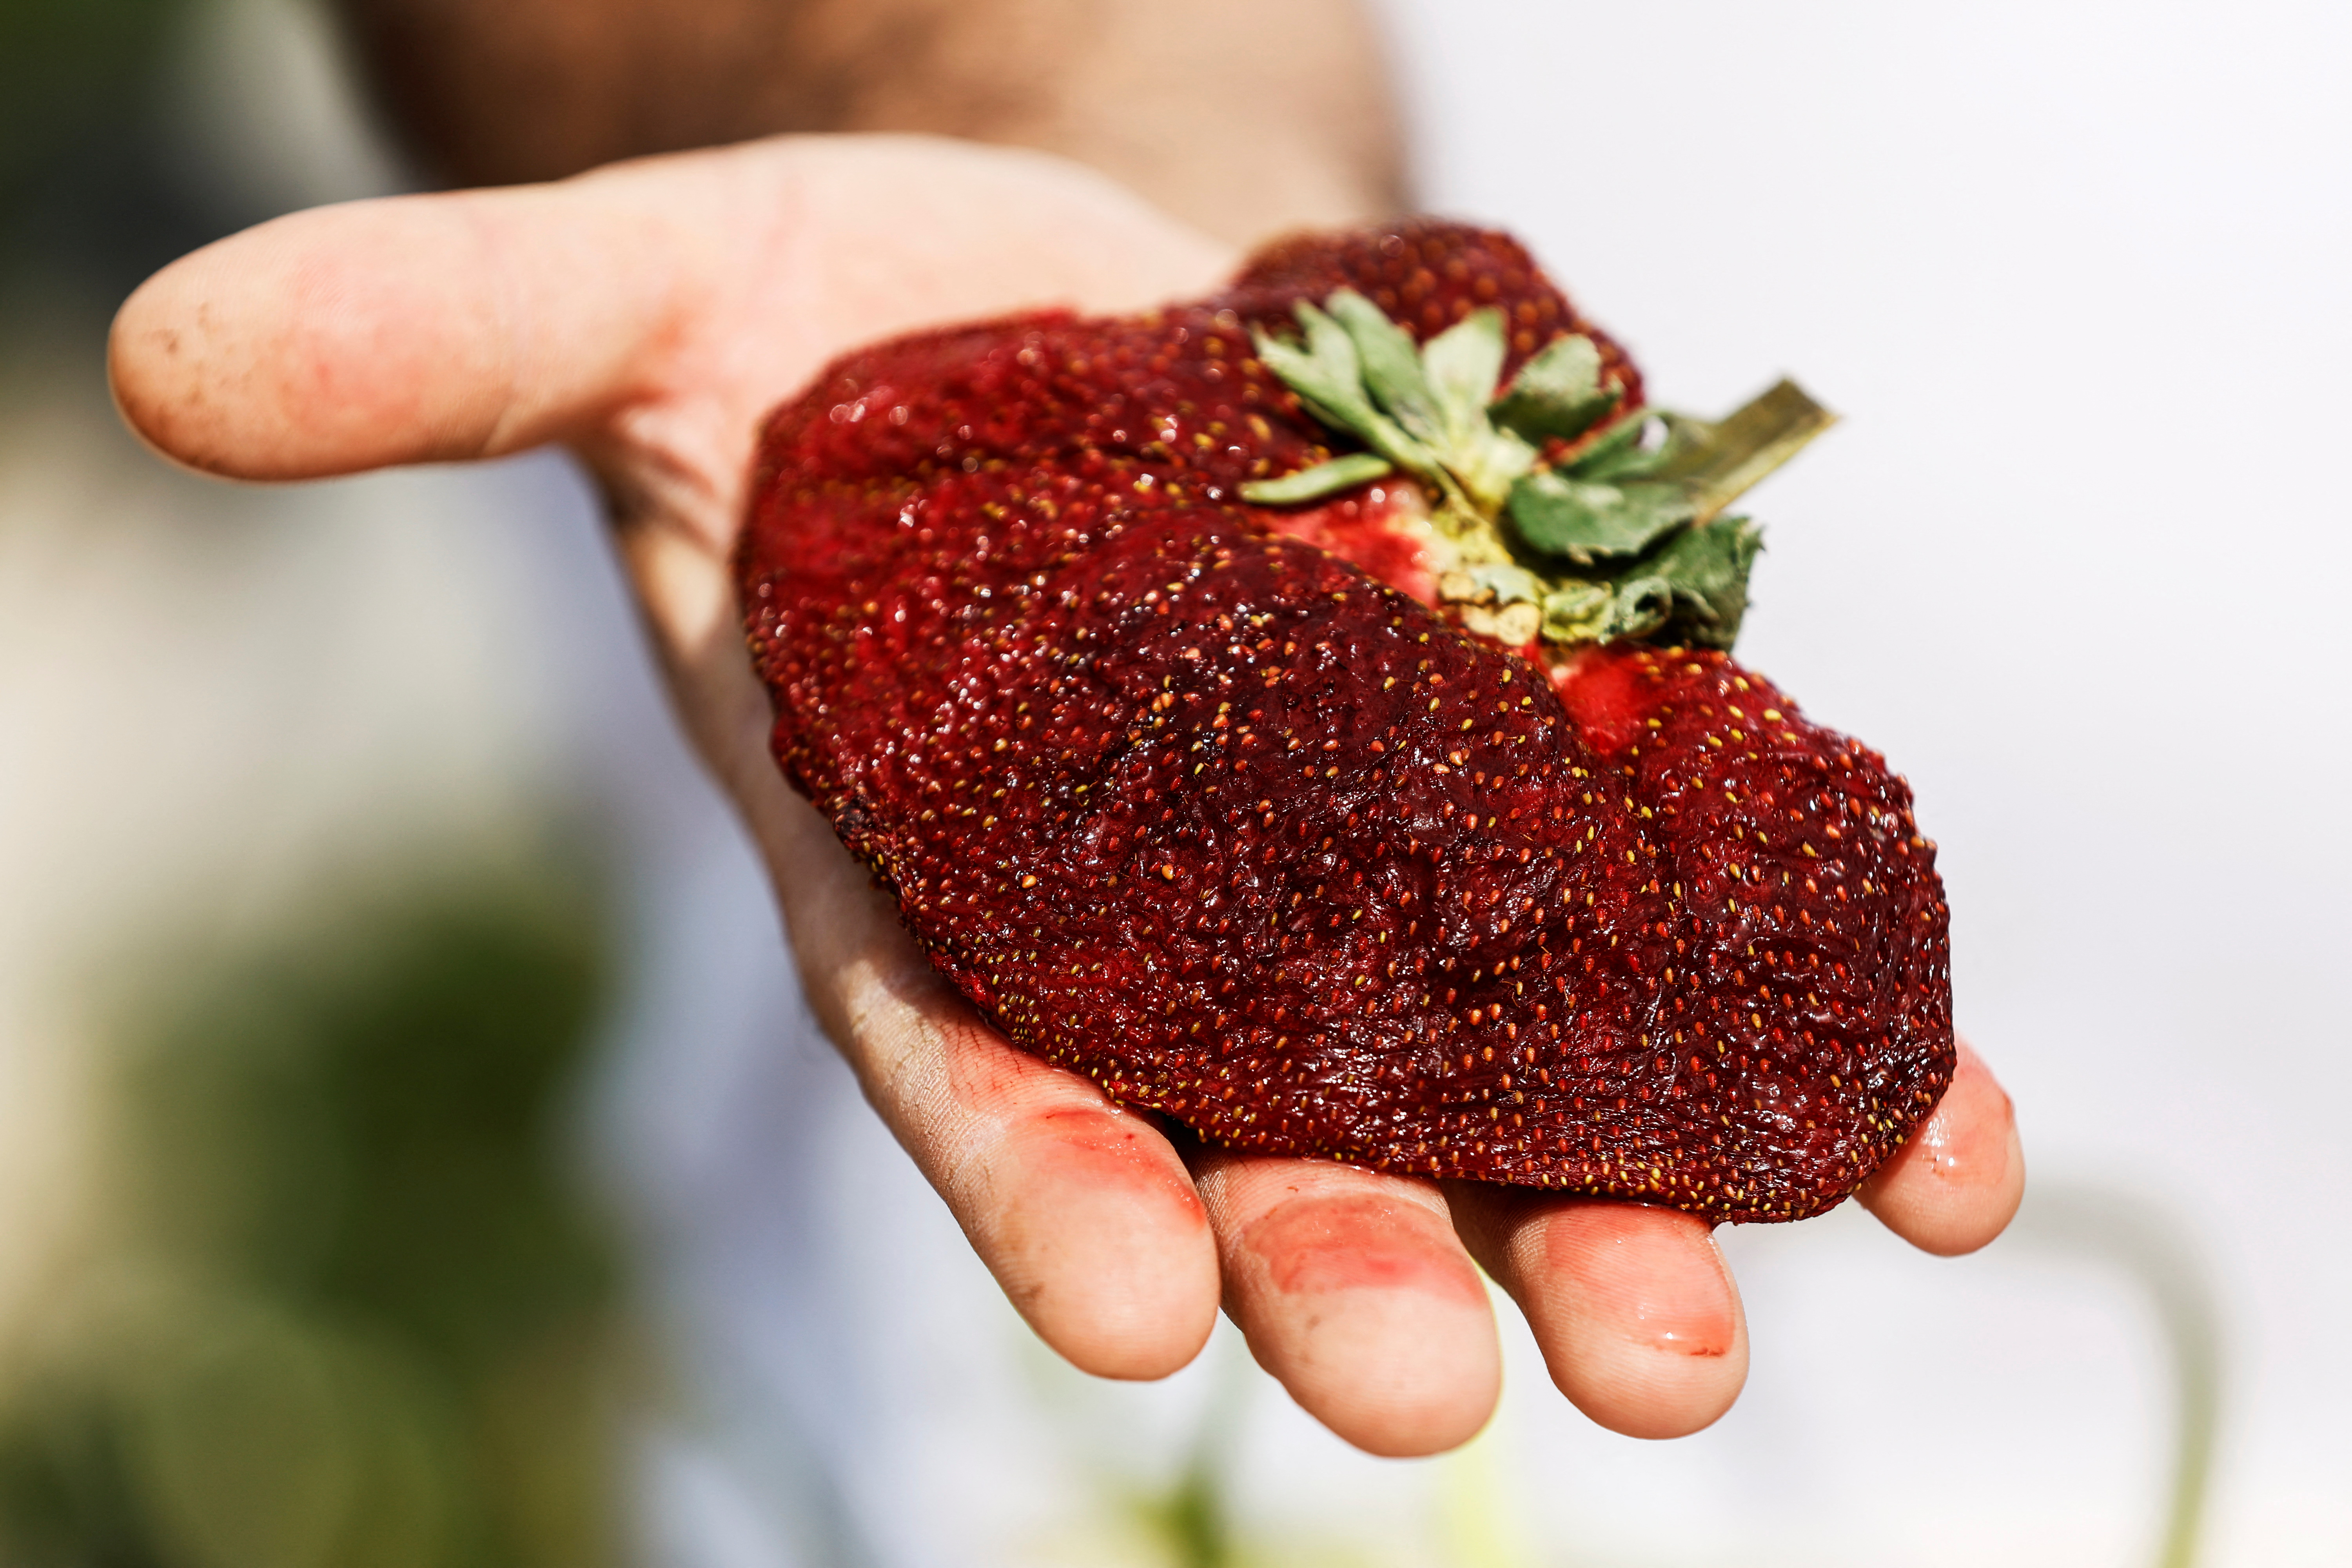 Israeli farmer Tzahi Ariel presents his giant strawberry, weighing 289 gram and grown in Israel after it sets a new Guinness record in Kadima